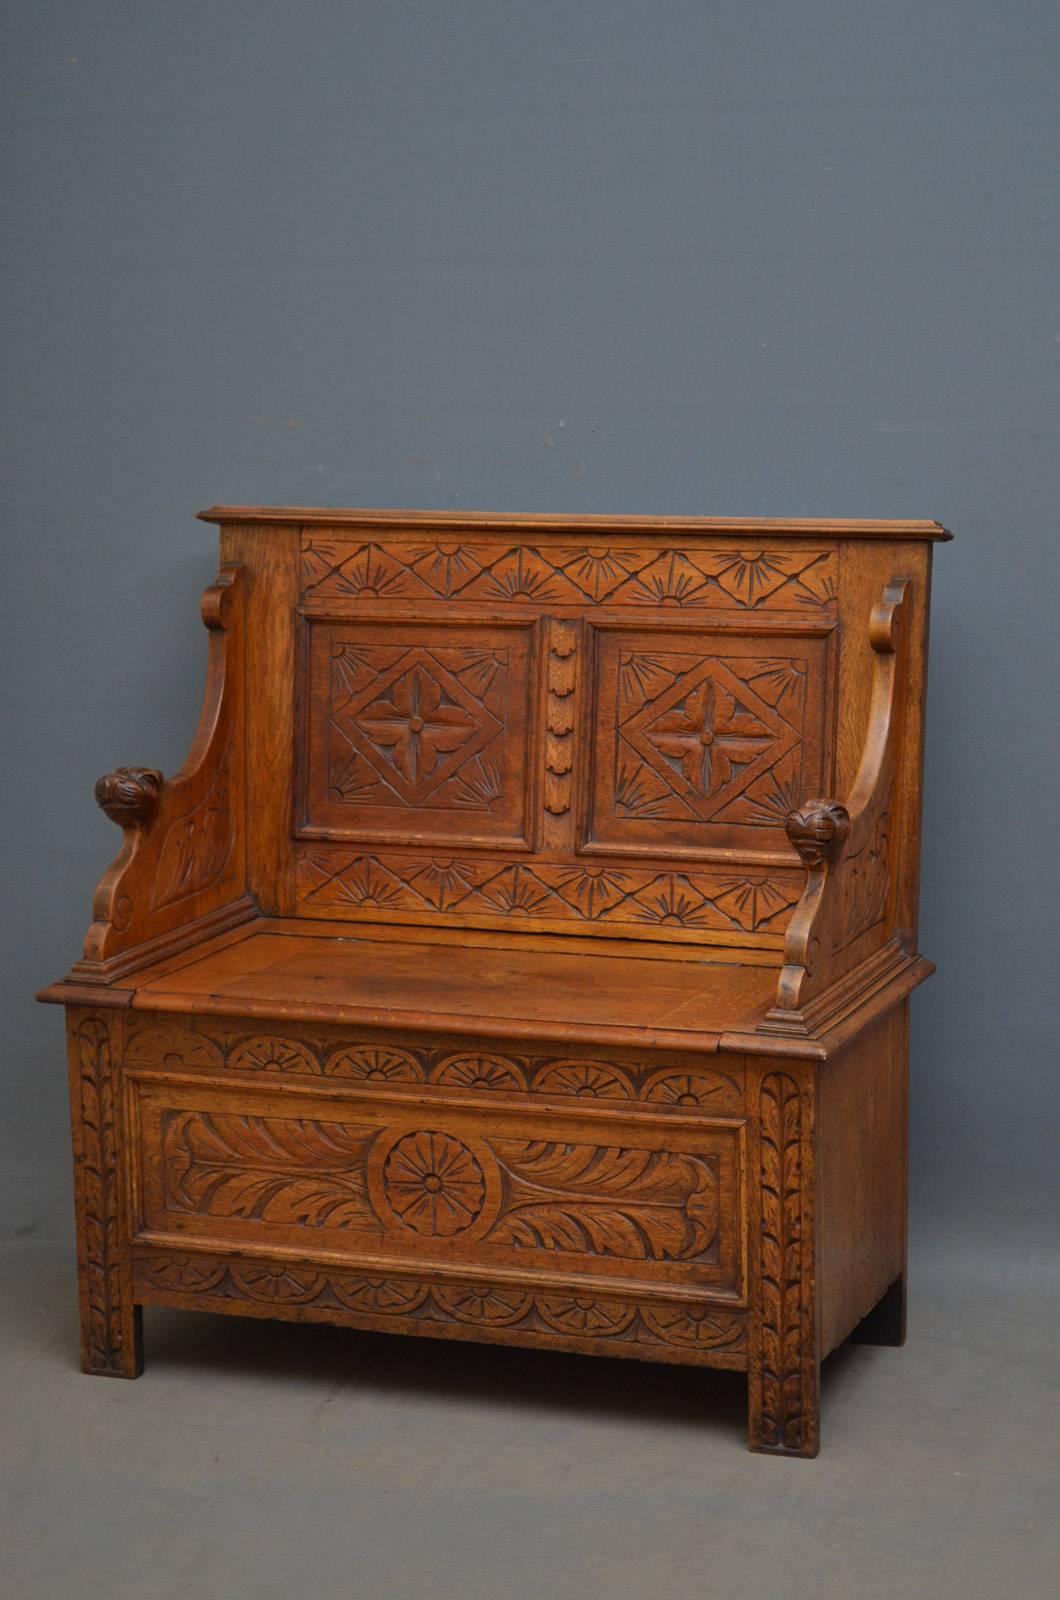 K0304, turn of the century oak bench of small proportions, having carved and panelled back, hinged seat enclosing a storage compartment, carved arms and panelled and carved base. This antique hall bench retains its original finish, color and